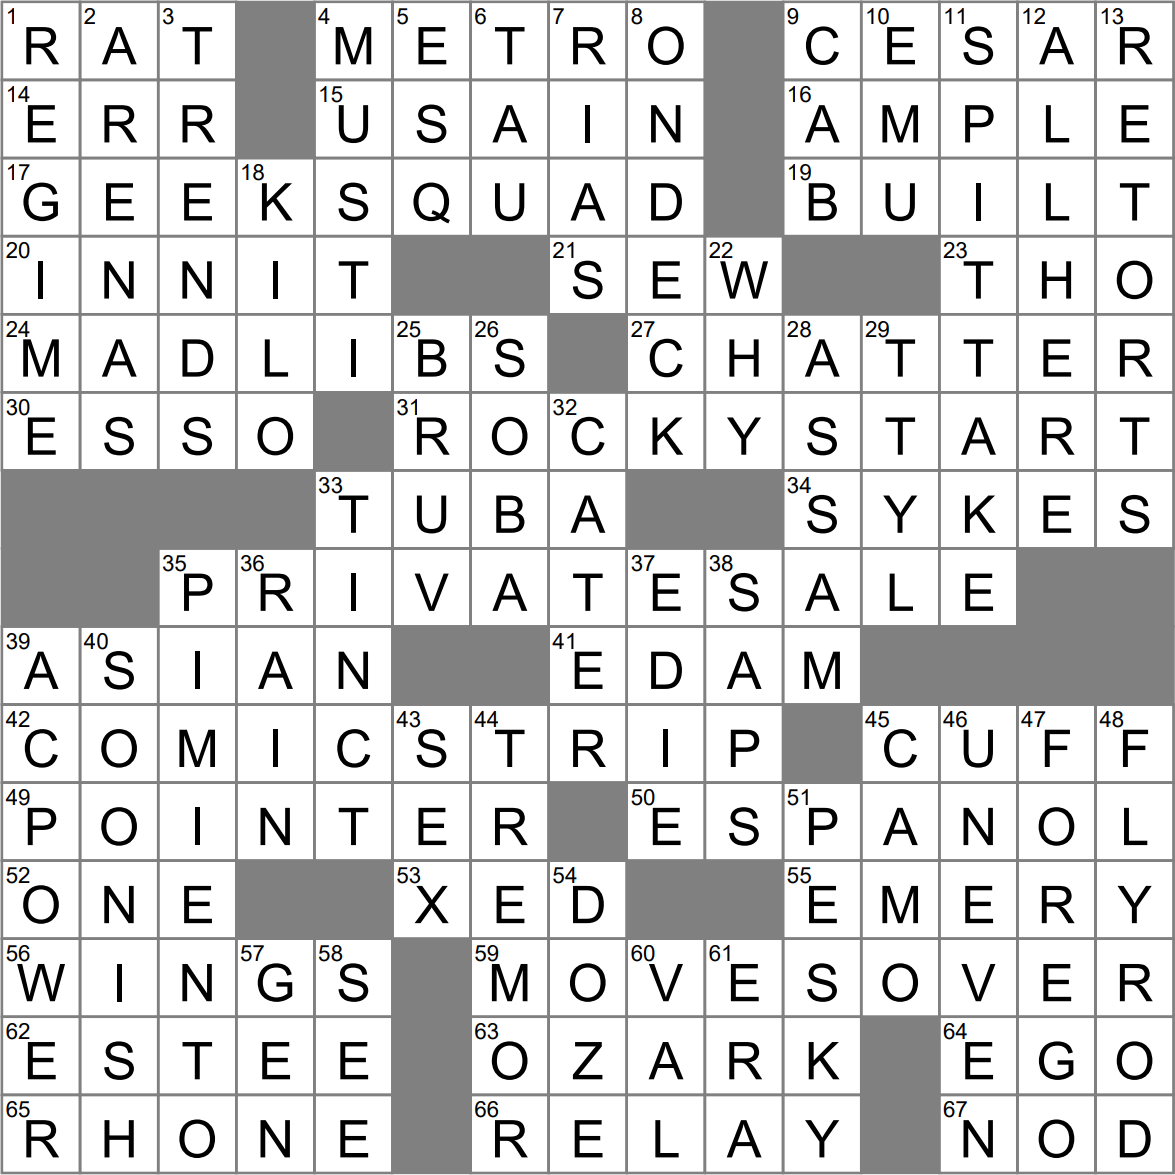 Ruling period crossword clue Archives - LAXCrossword.com